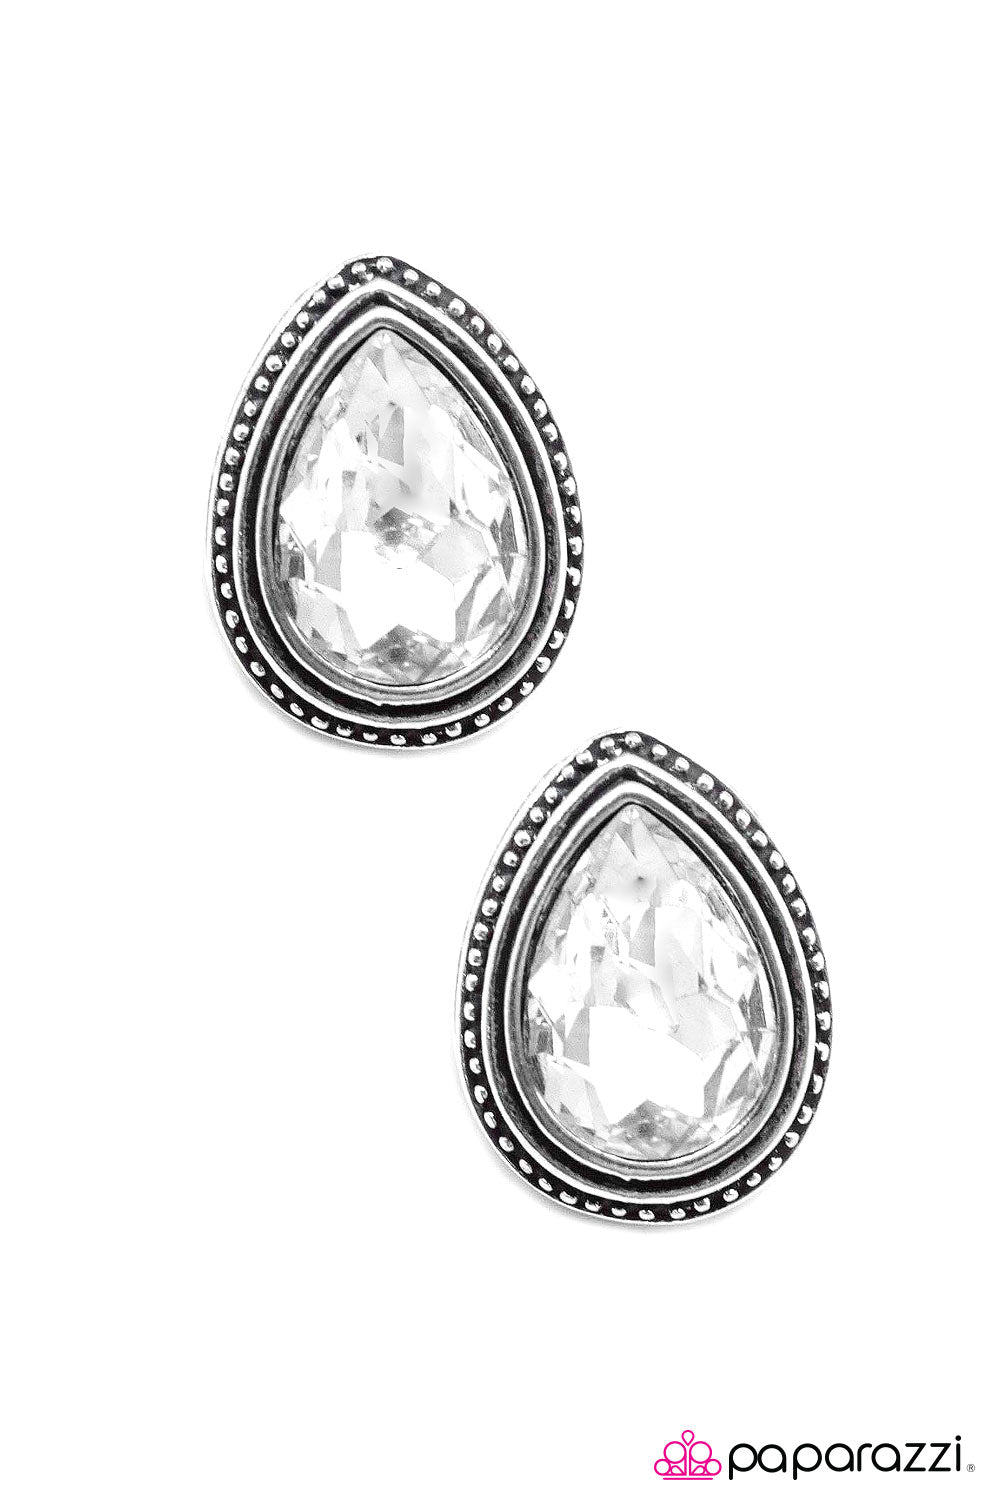 The Deluxe White Earrings - Paparazzi Accessories- lightbox - CarasShop.com - $5 Jewelry by Cara Jewels